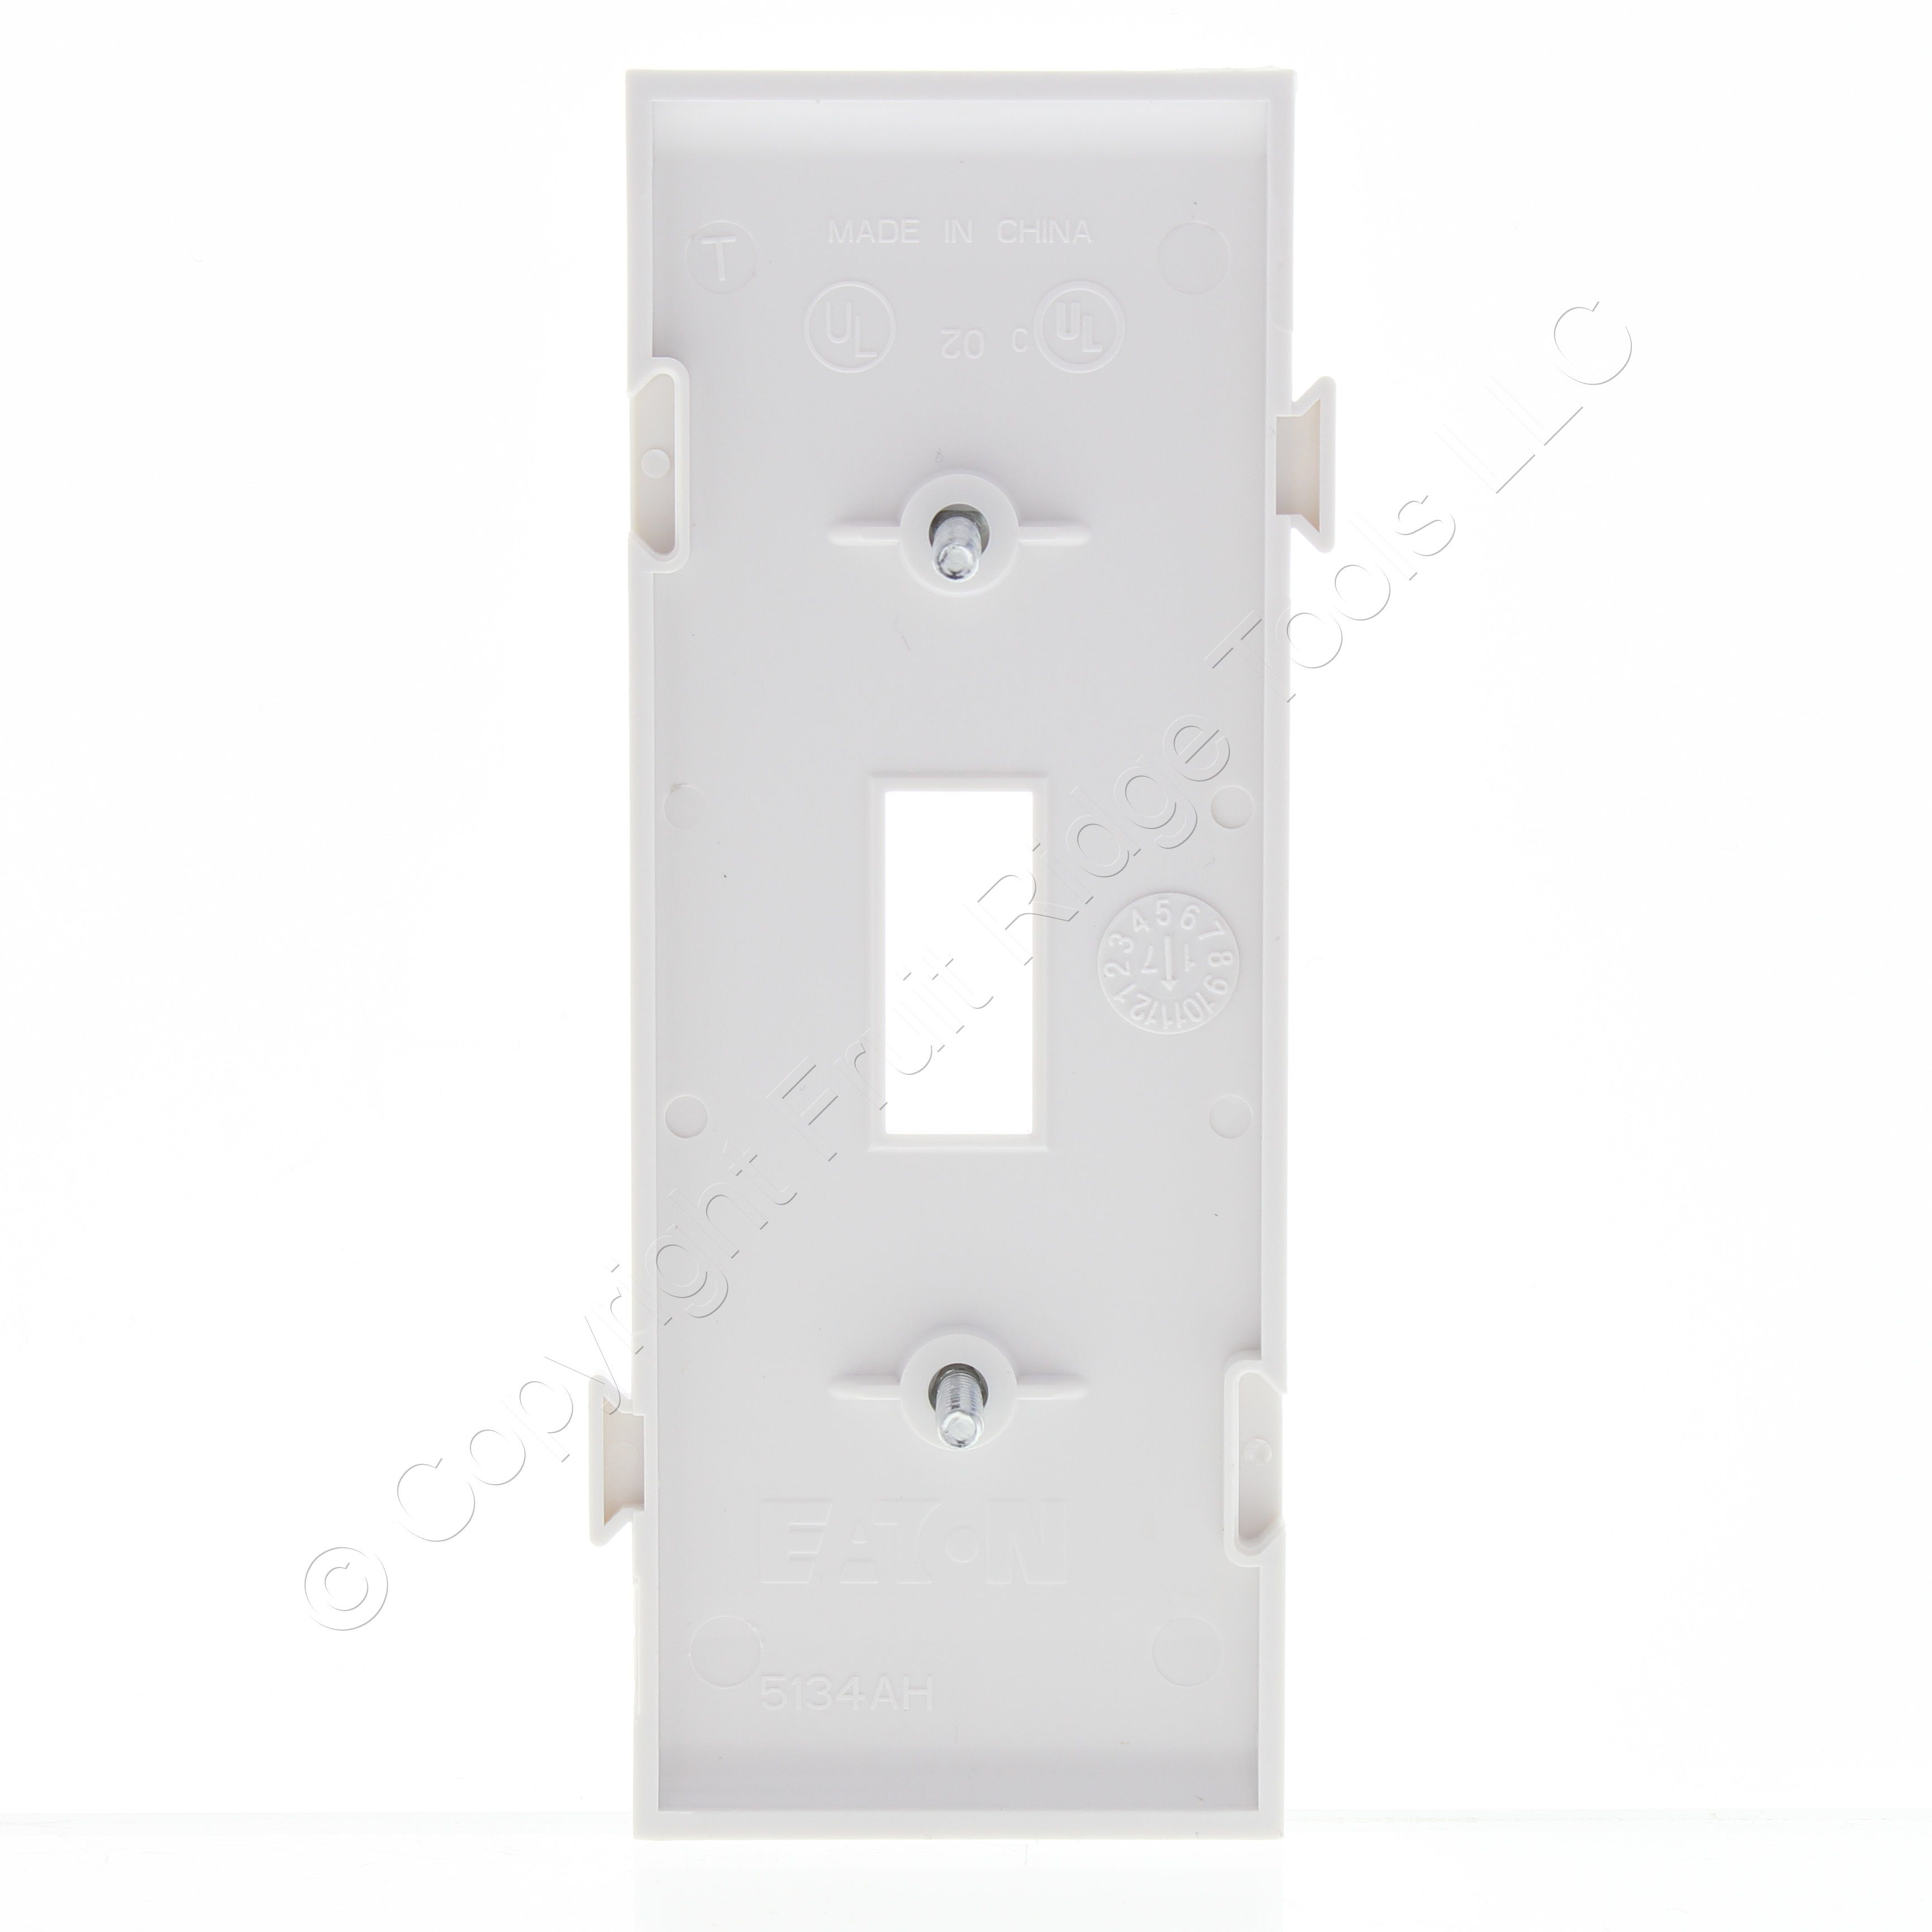 Cooper Mid-Size White Thermoplastic 2-Gang Blank Switch Cover Wallplate PJ113W